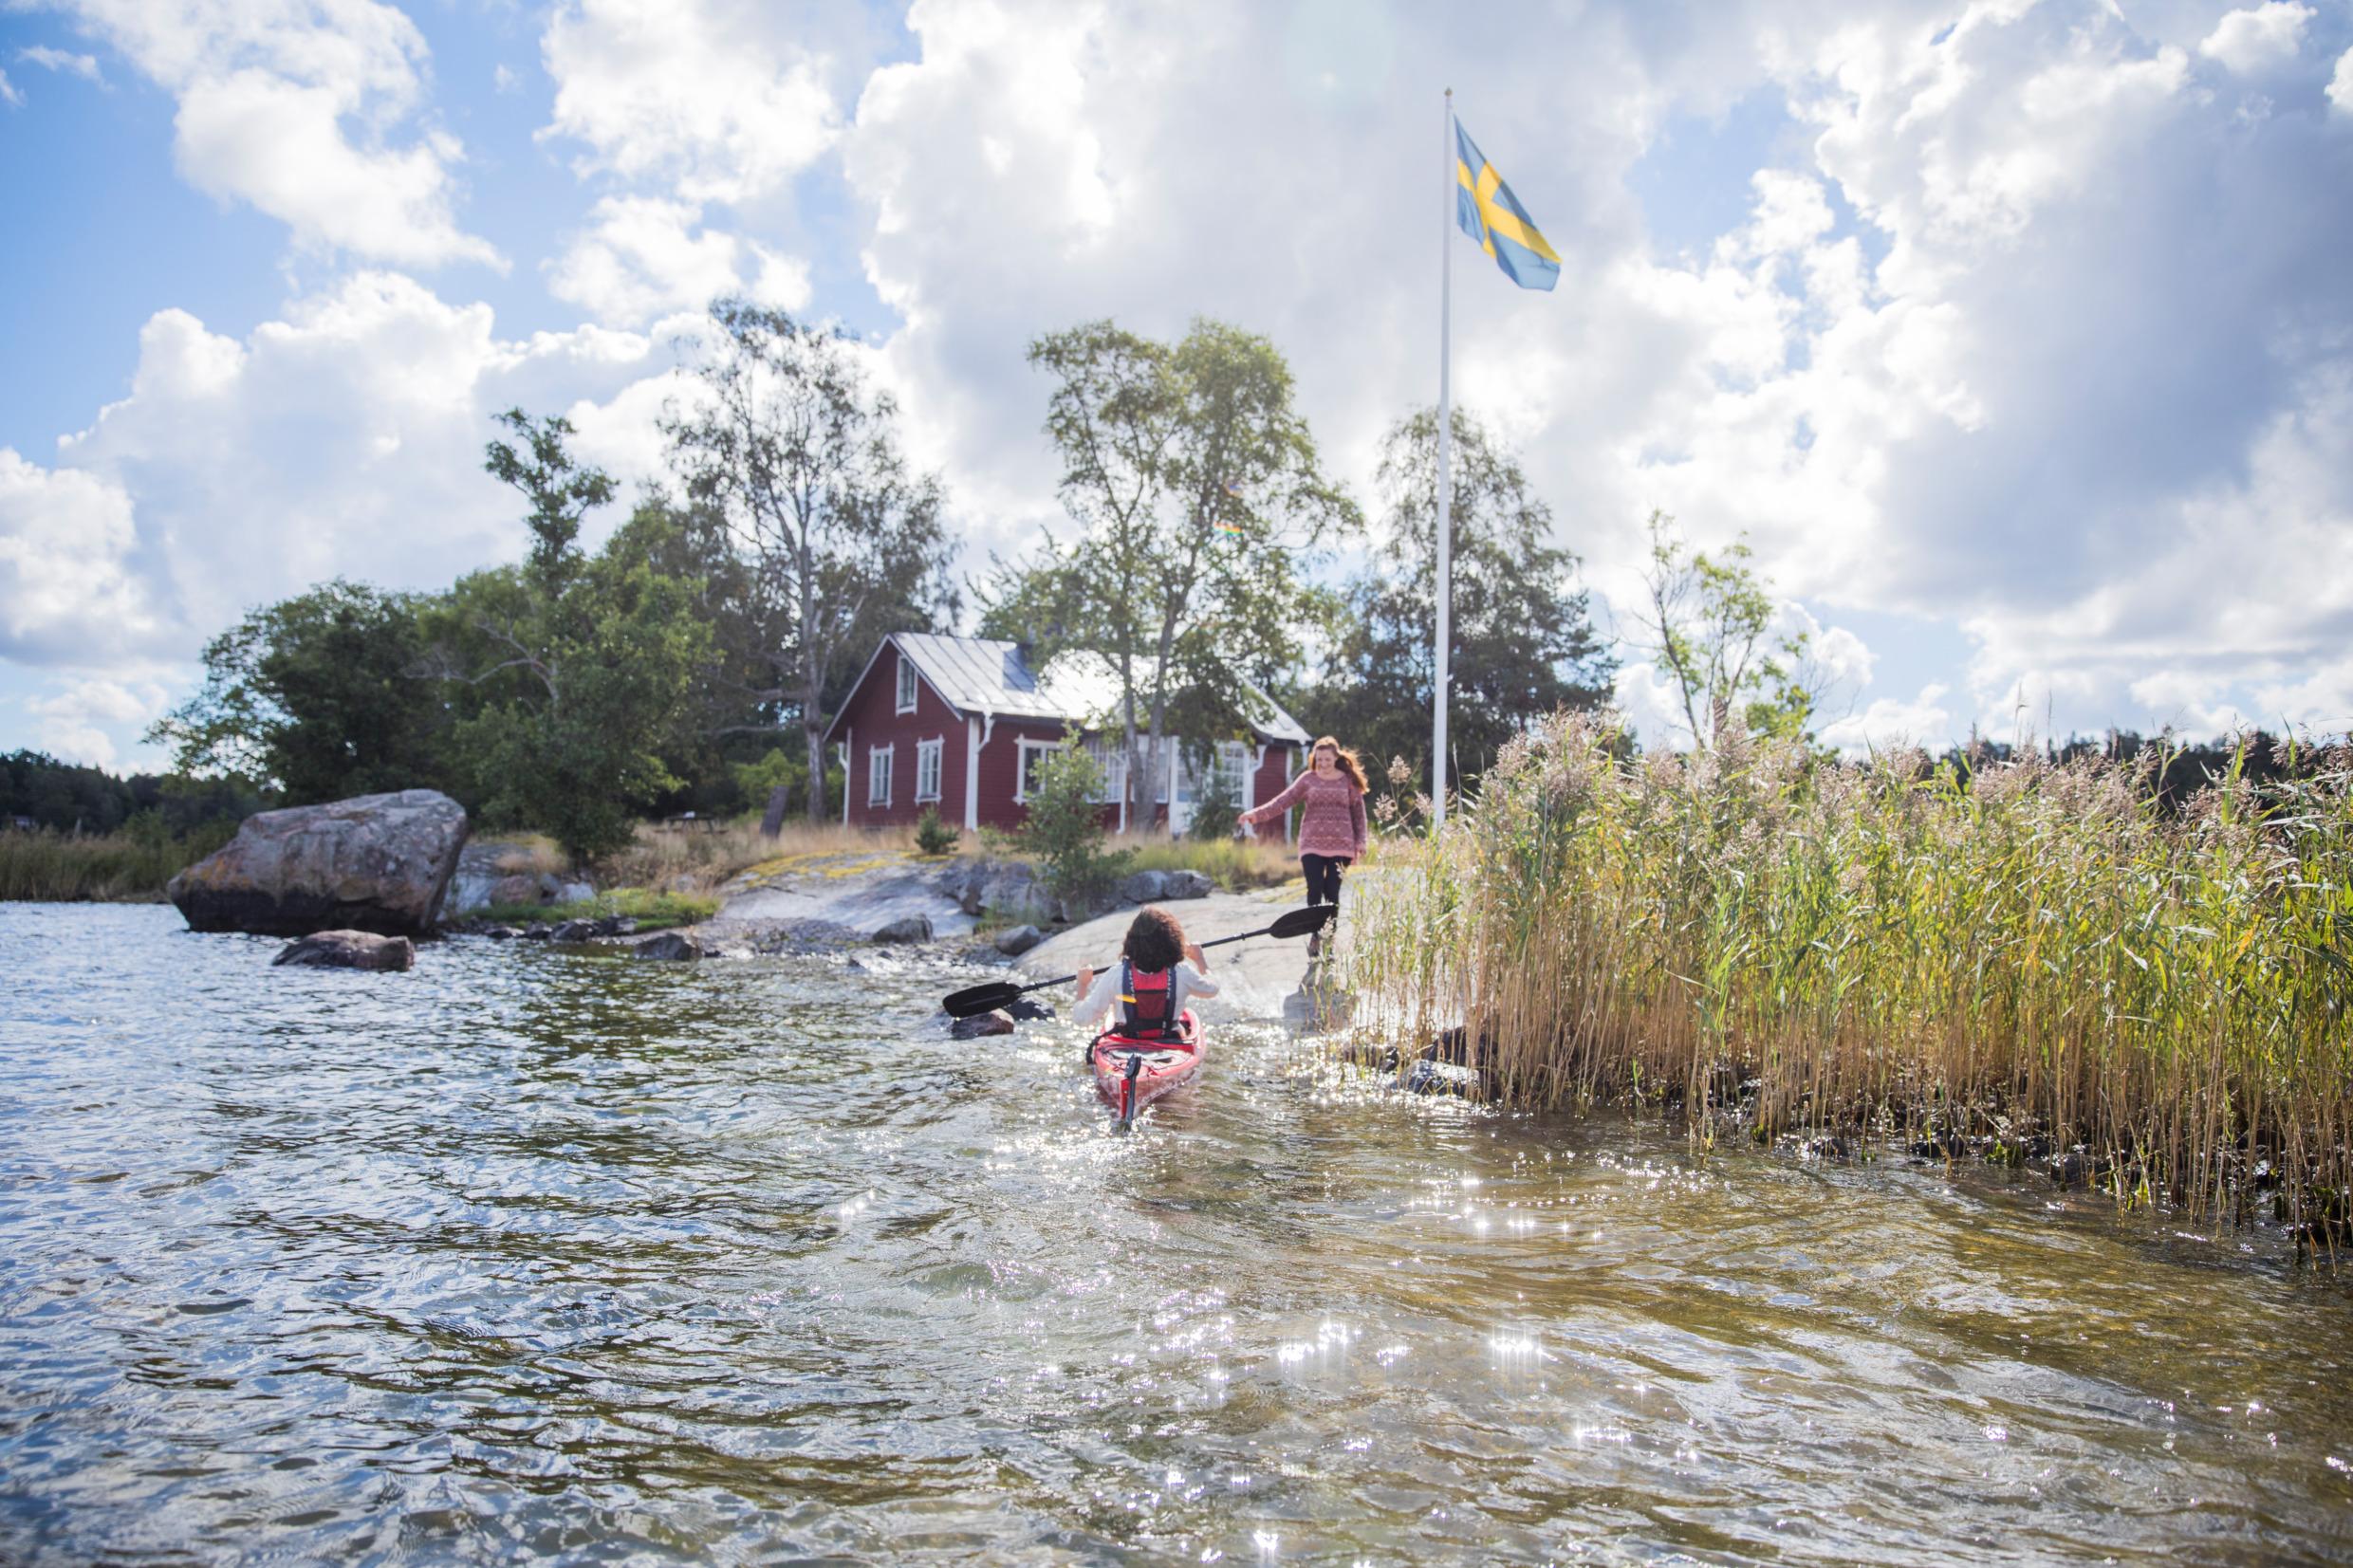 A woman on a cliff receives another woman who comes paddling in a kayak in the archipelago. In the background a red cottage and a Swedish flag.